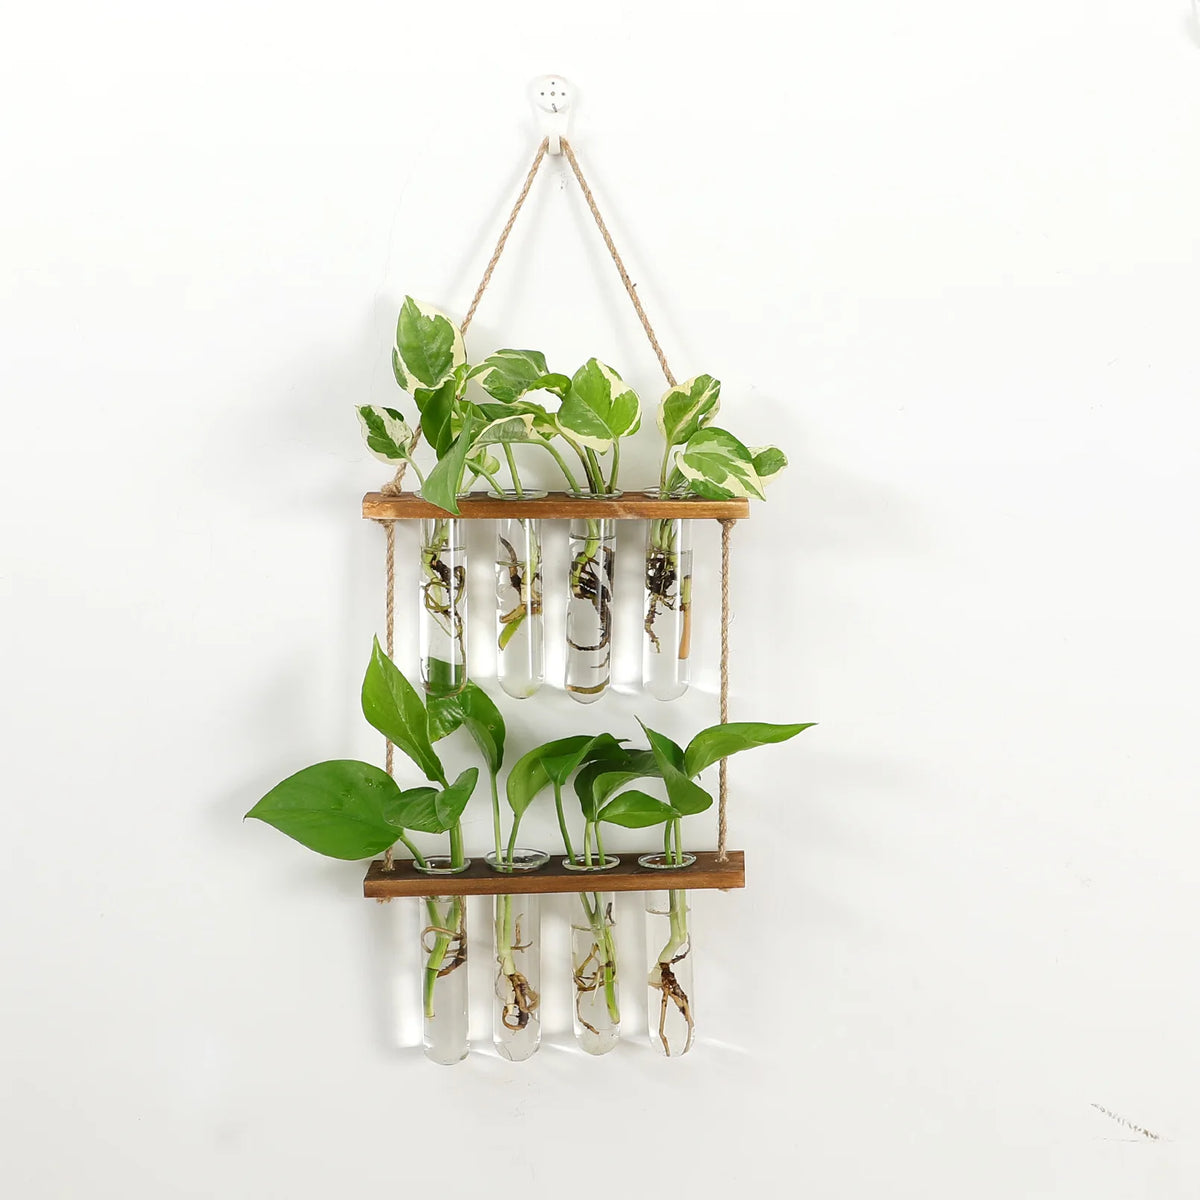 Wall Mounted Hanging Decorative Planter Test Tube Flower Bud Vase for  Indoor Propagating Hydroponic Plants - China Wall Mounted Hanging Planter  Test Tube Vase, Planter Test Tube Flower Bud Vase for Plants